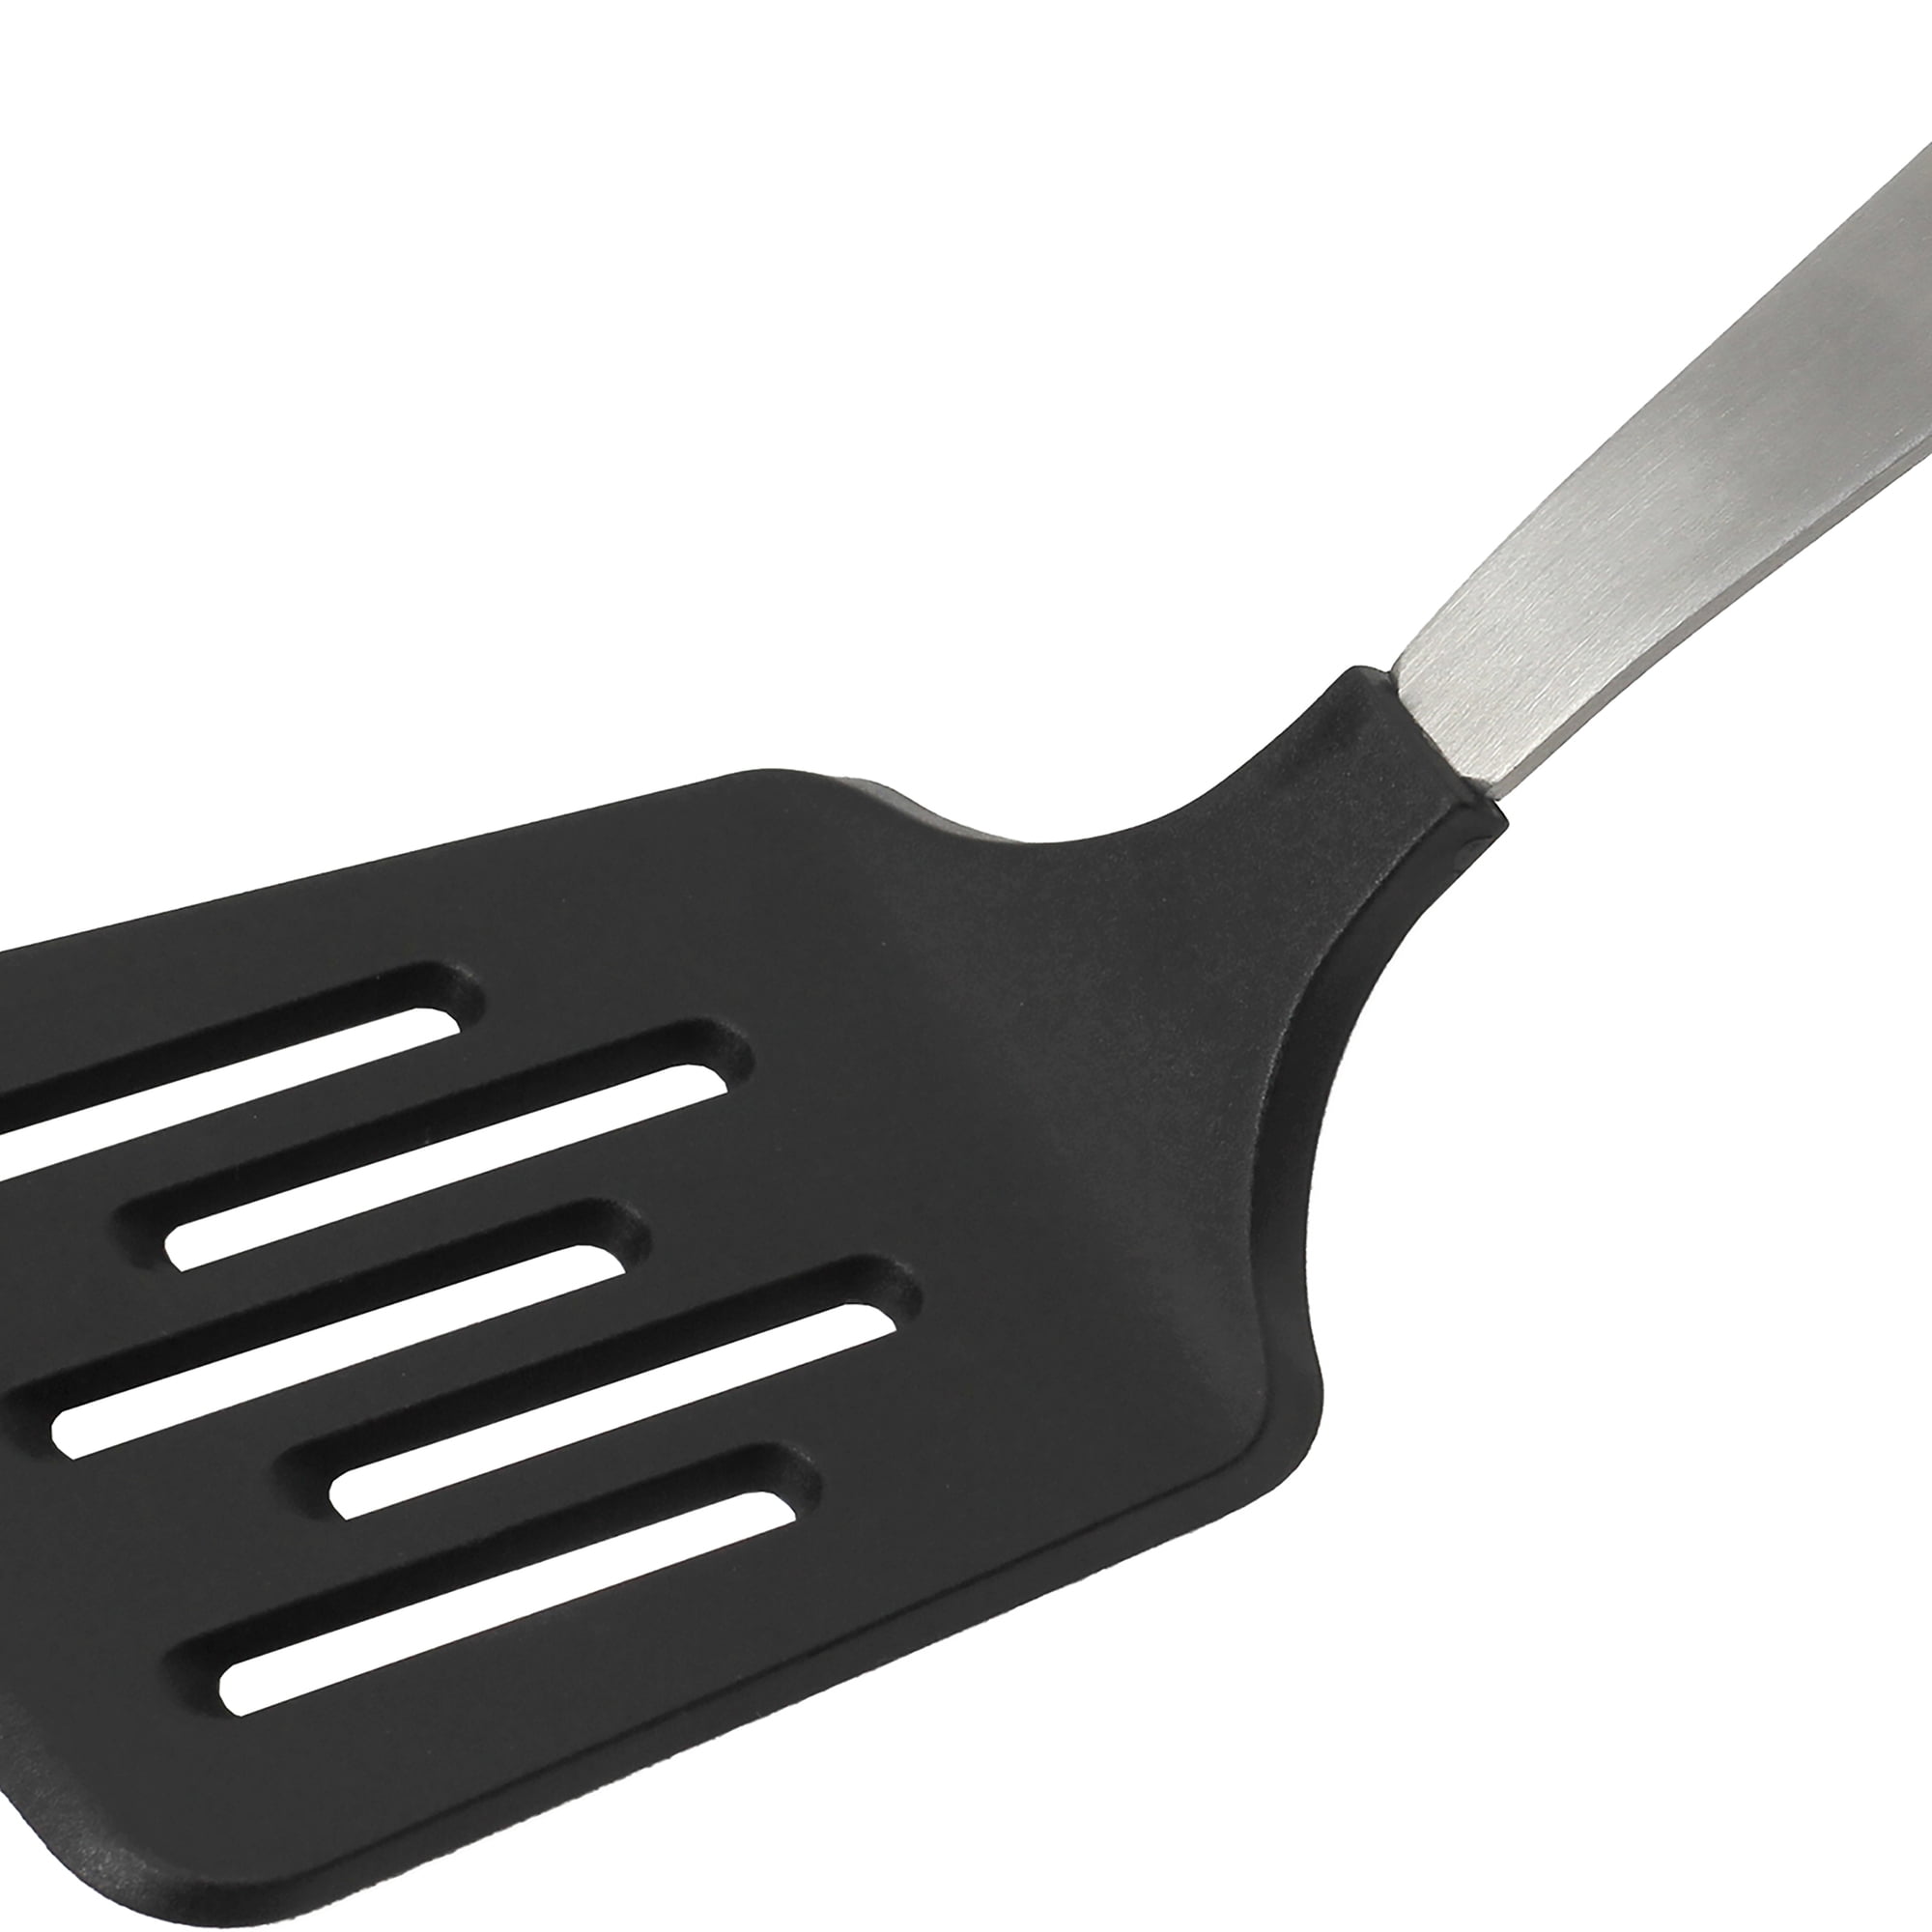 Tailor Made Products Stainless Steel Nylon Slotted Turner Spatula Utensil -  Durable Material, Heat R…See more Tailor Made Products Stainless Steel